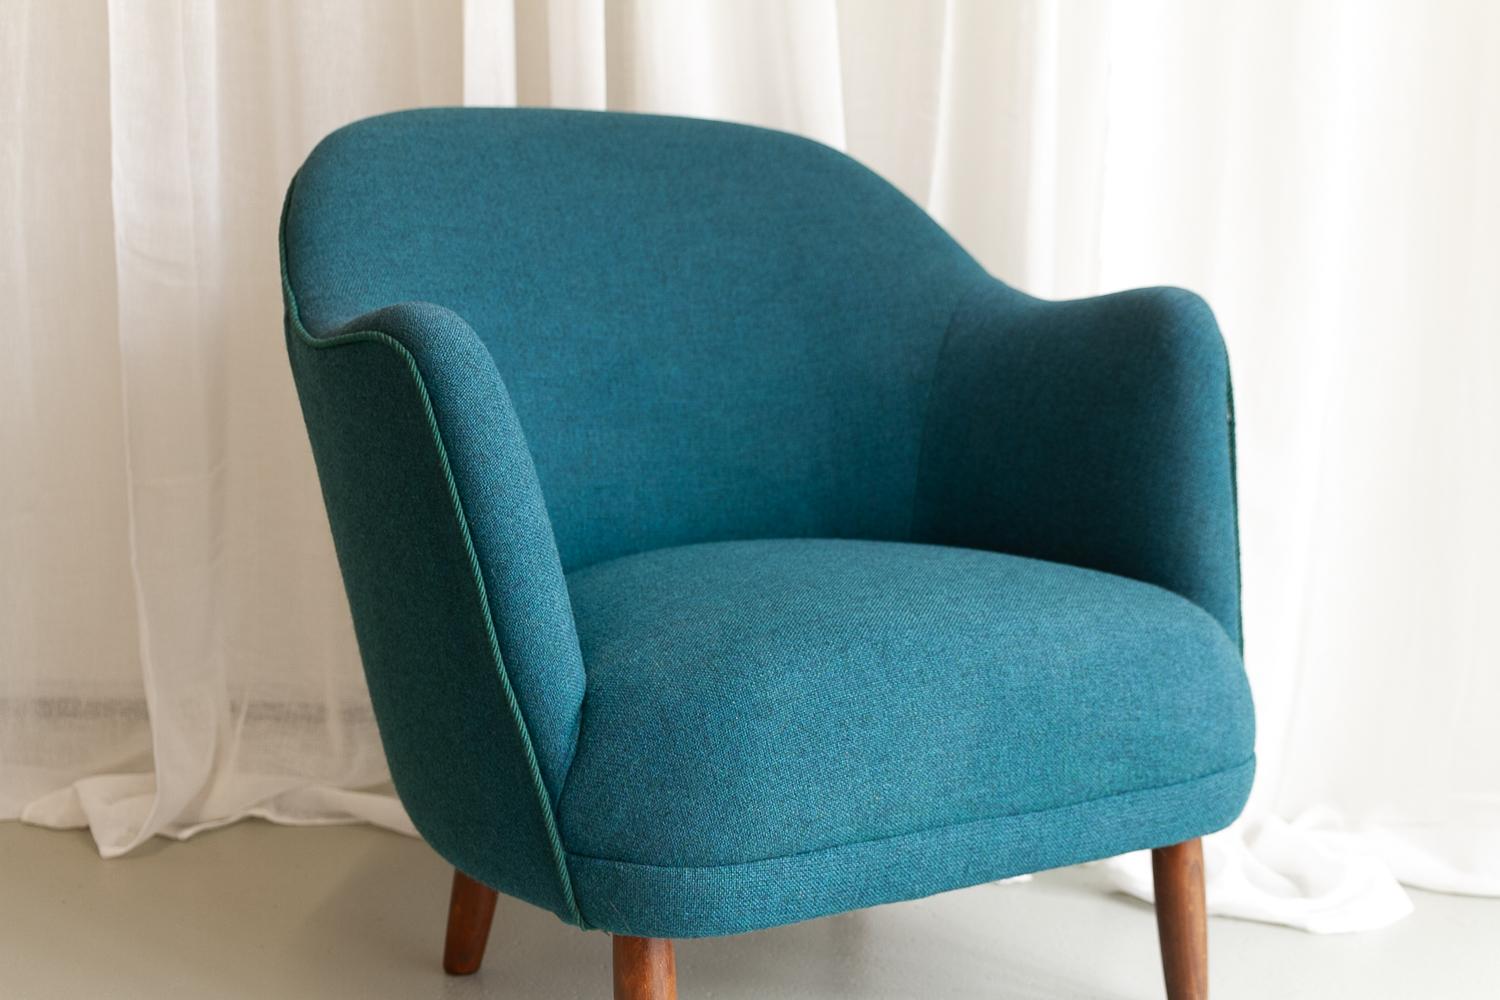 Mid-Century Modern Danish Modern Easy Chair in Teal Blue, 1950s. For Sale